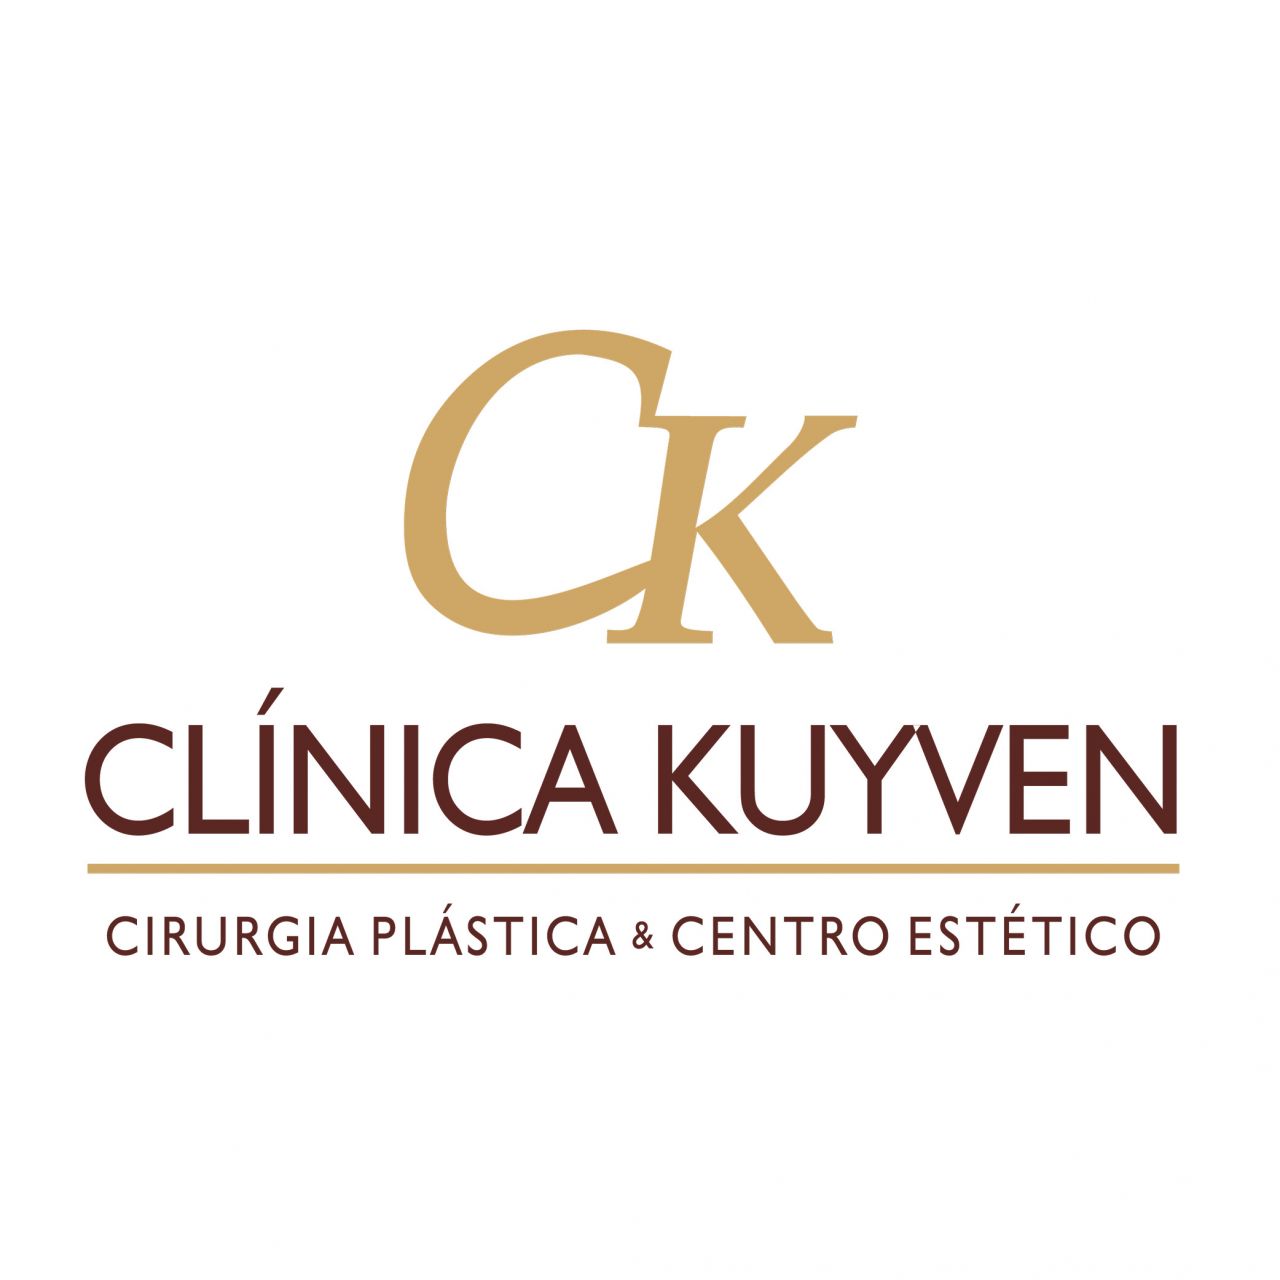 Clinica Kuyven